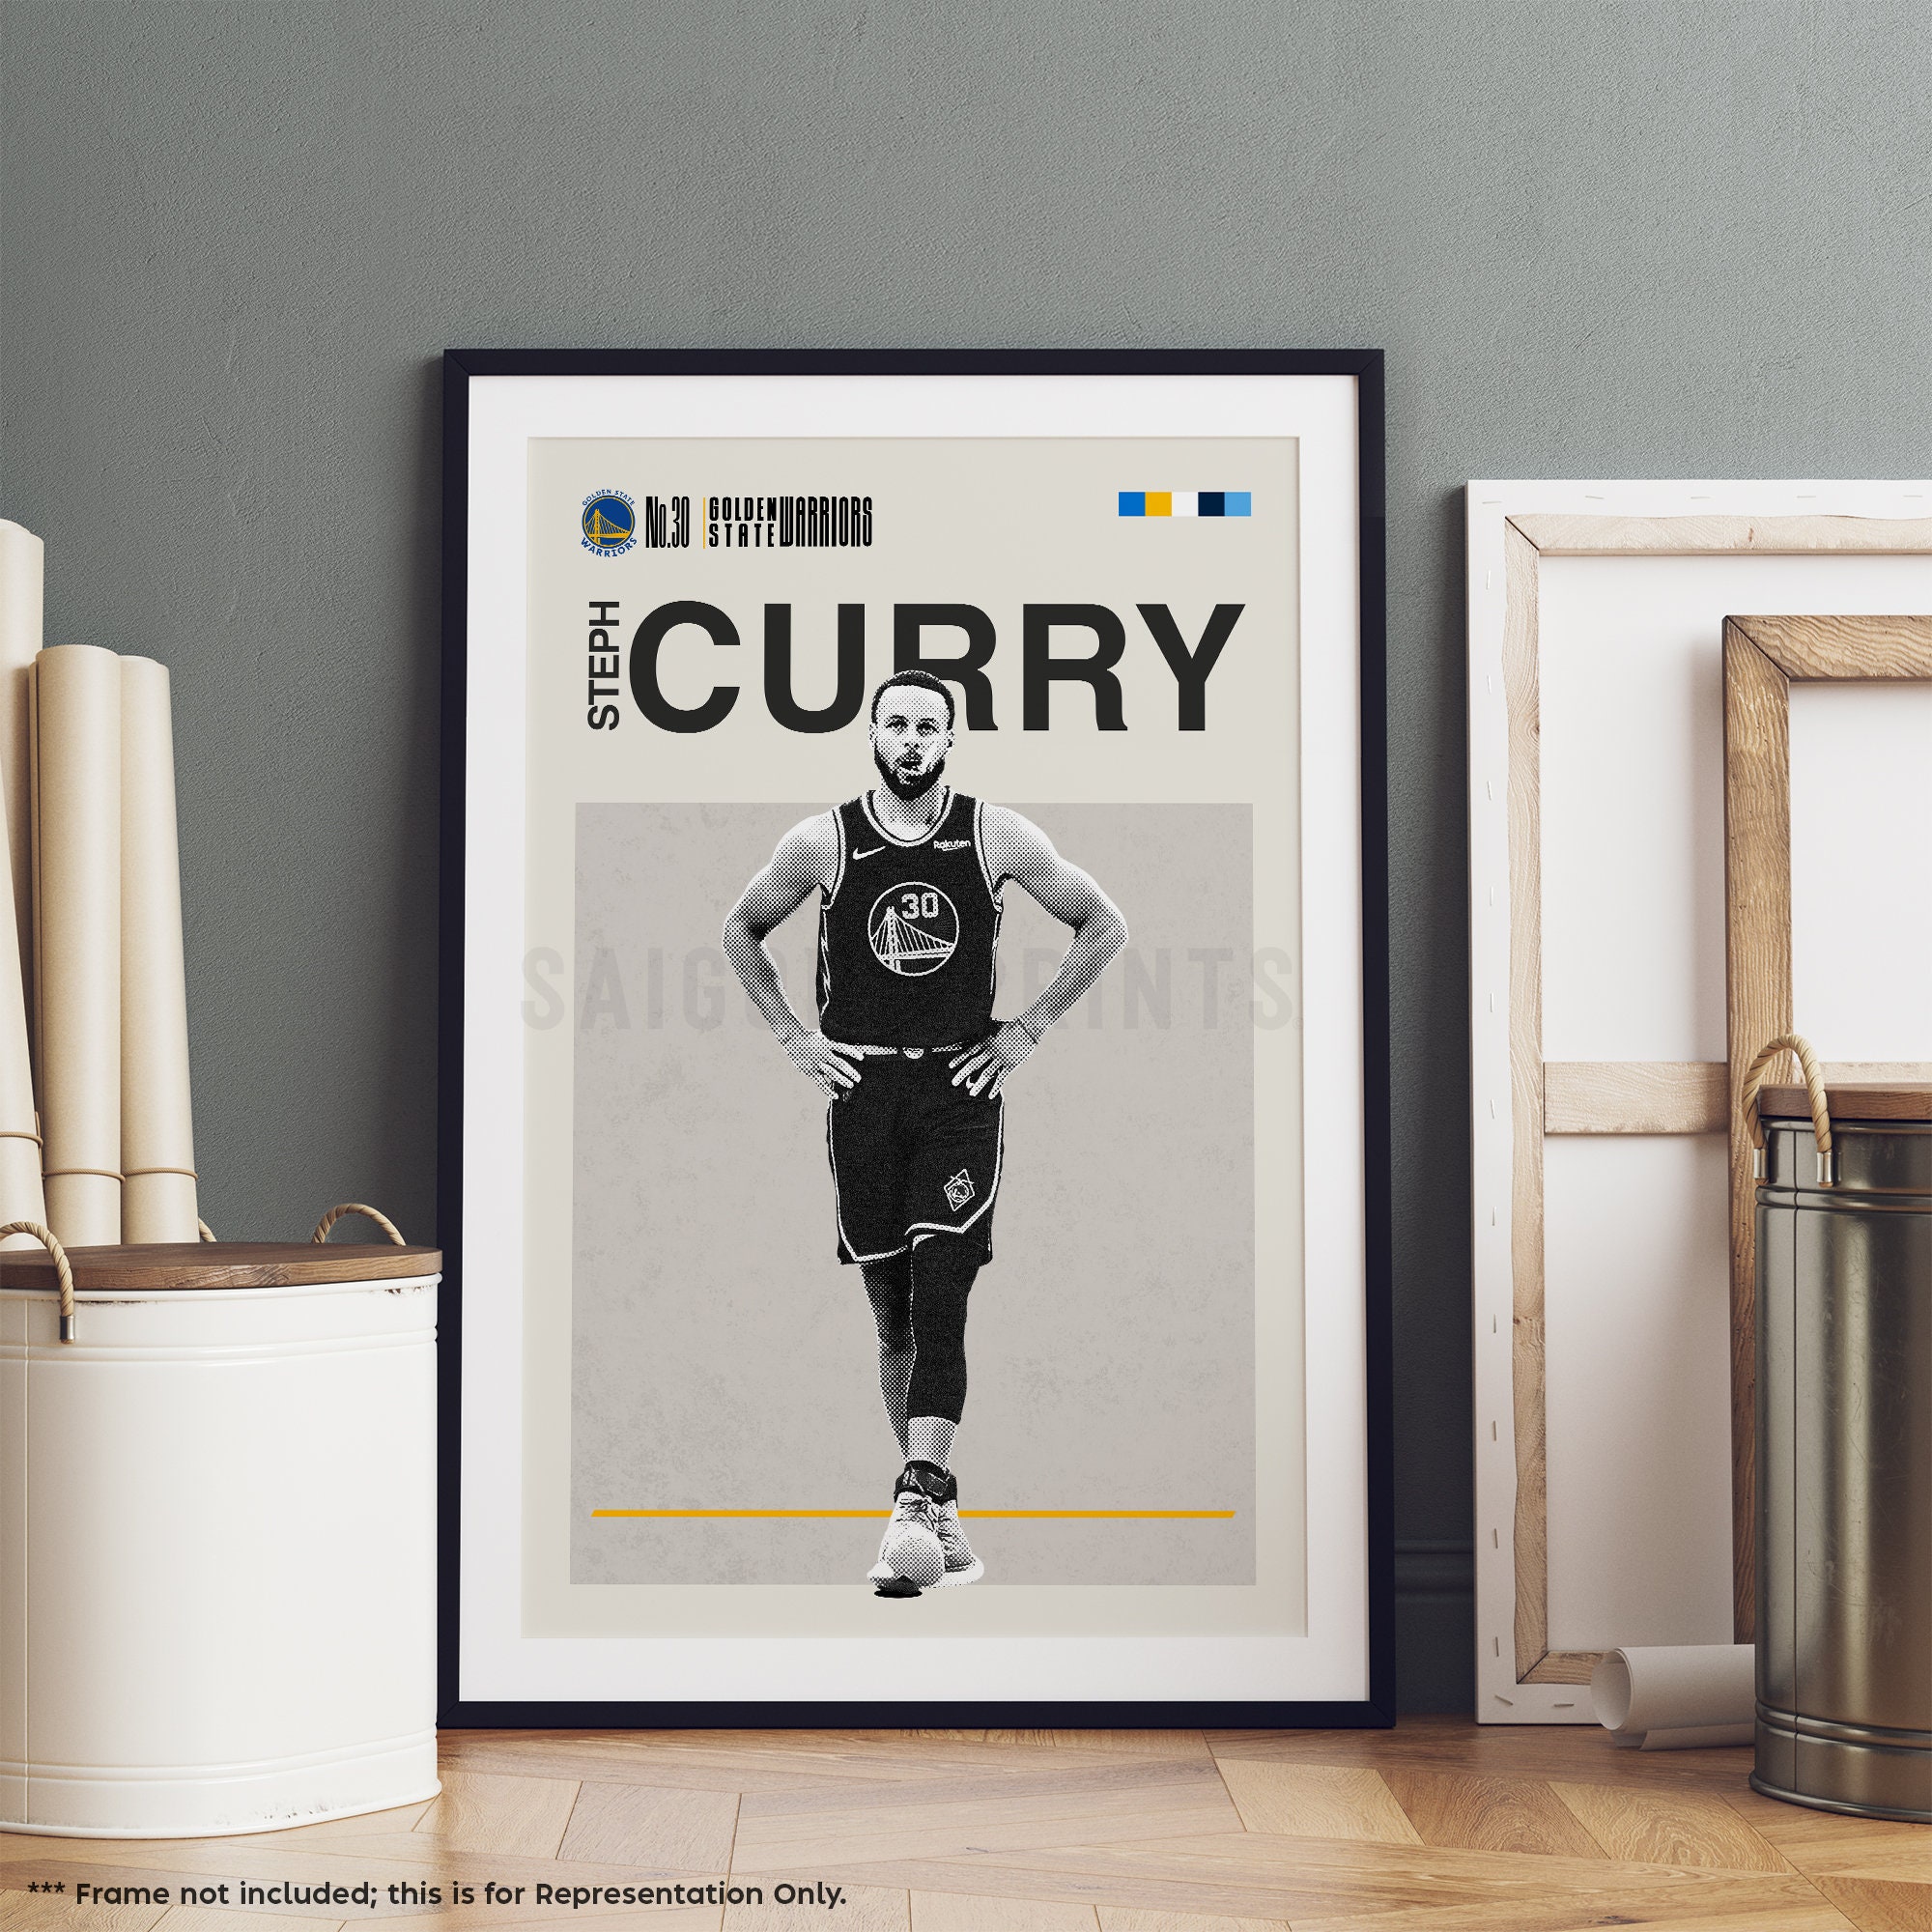 Stephen Curry Posters Stephen Curry Basketball Graffiti Posters HD Printing  Canvas Wall Art Decorati…See more Stephen Curry Posters Stephen Curry